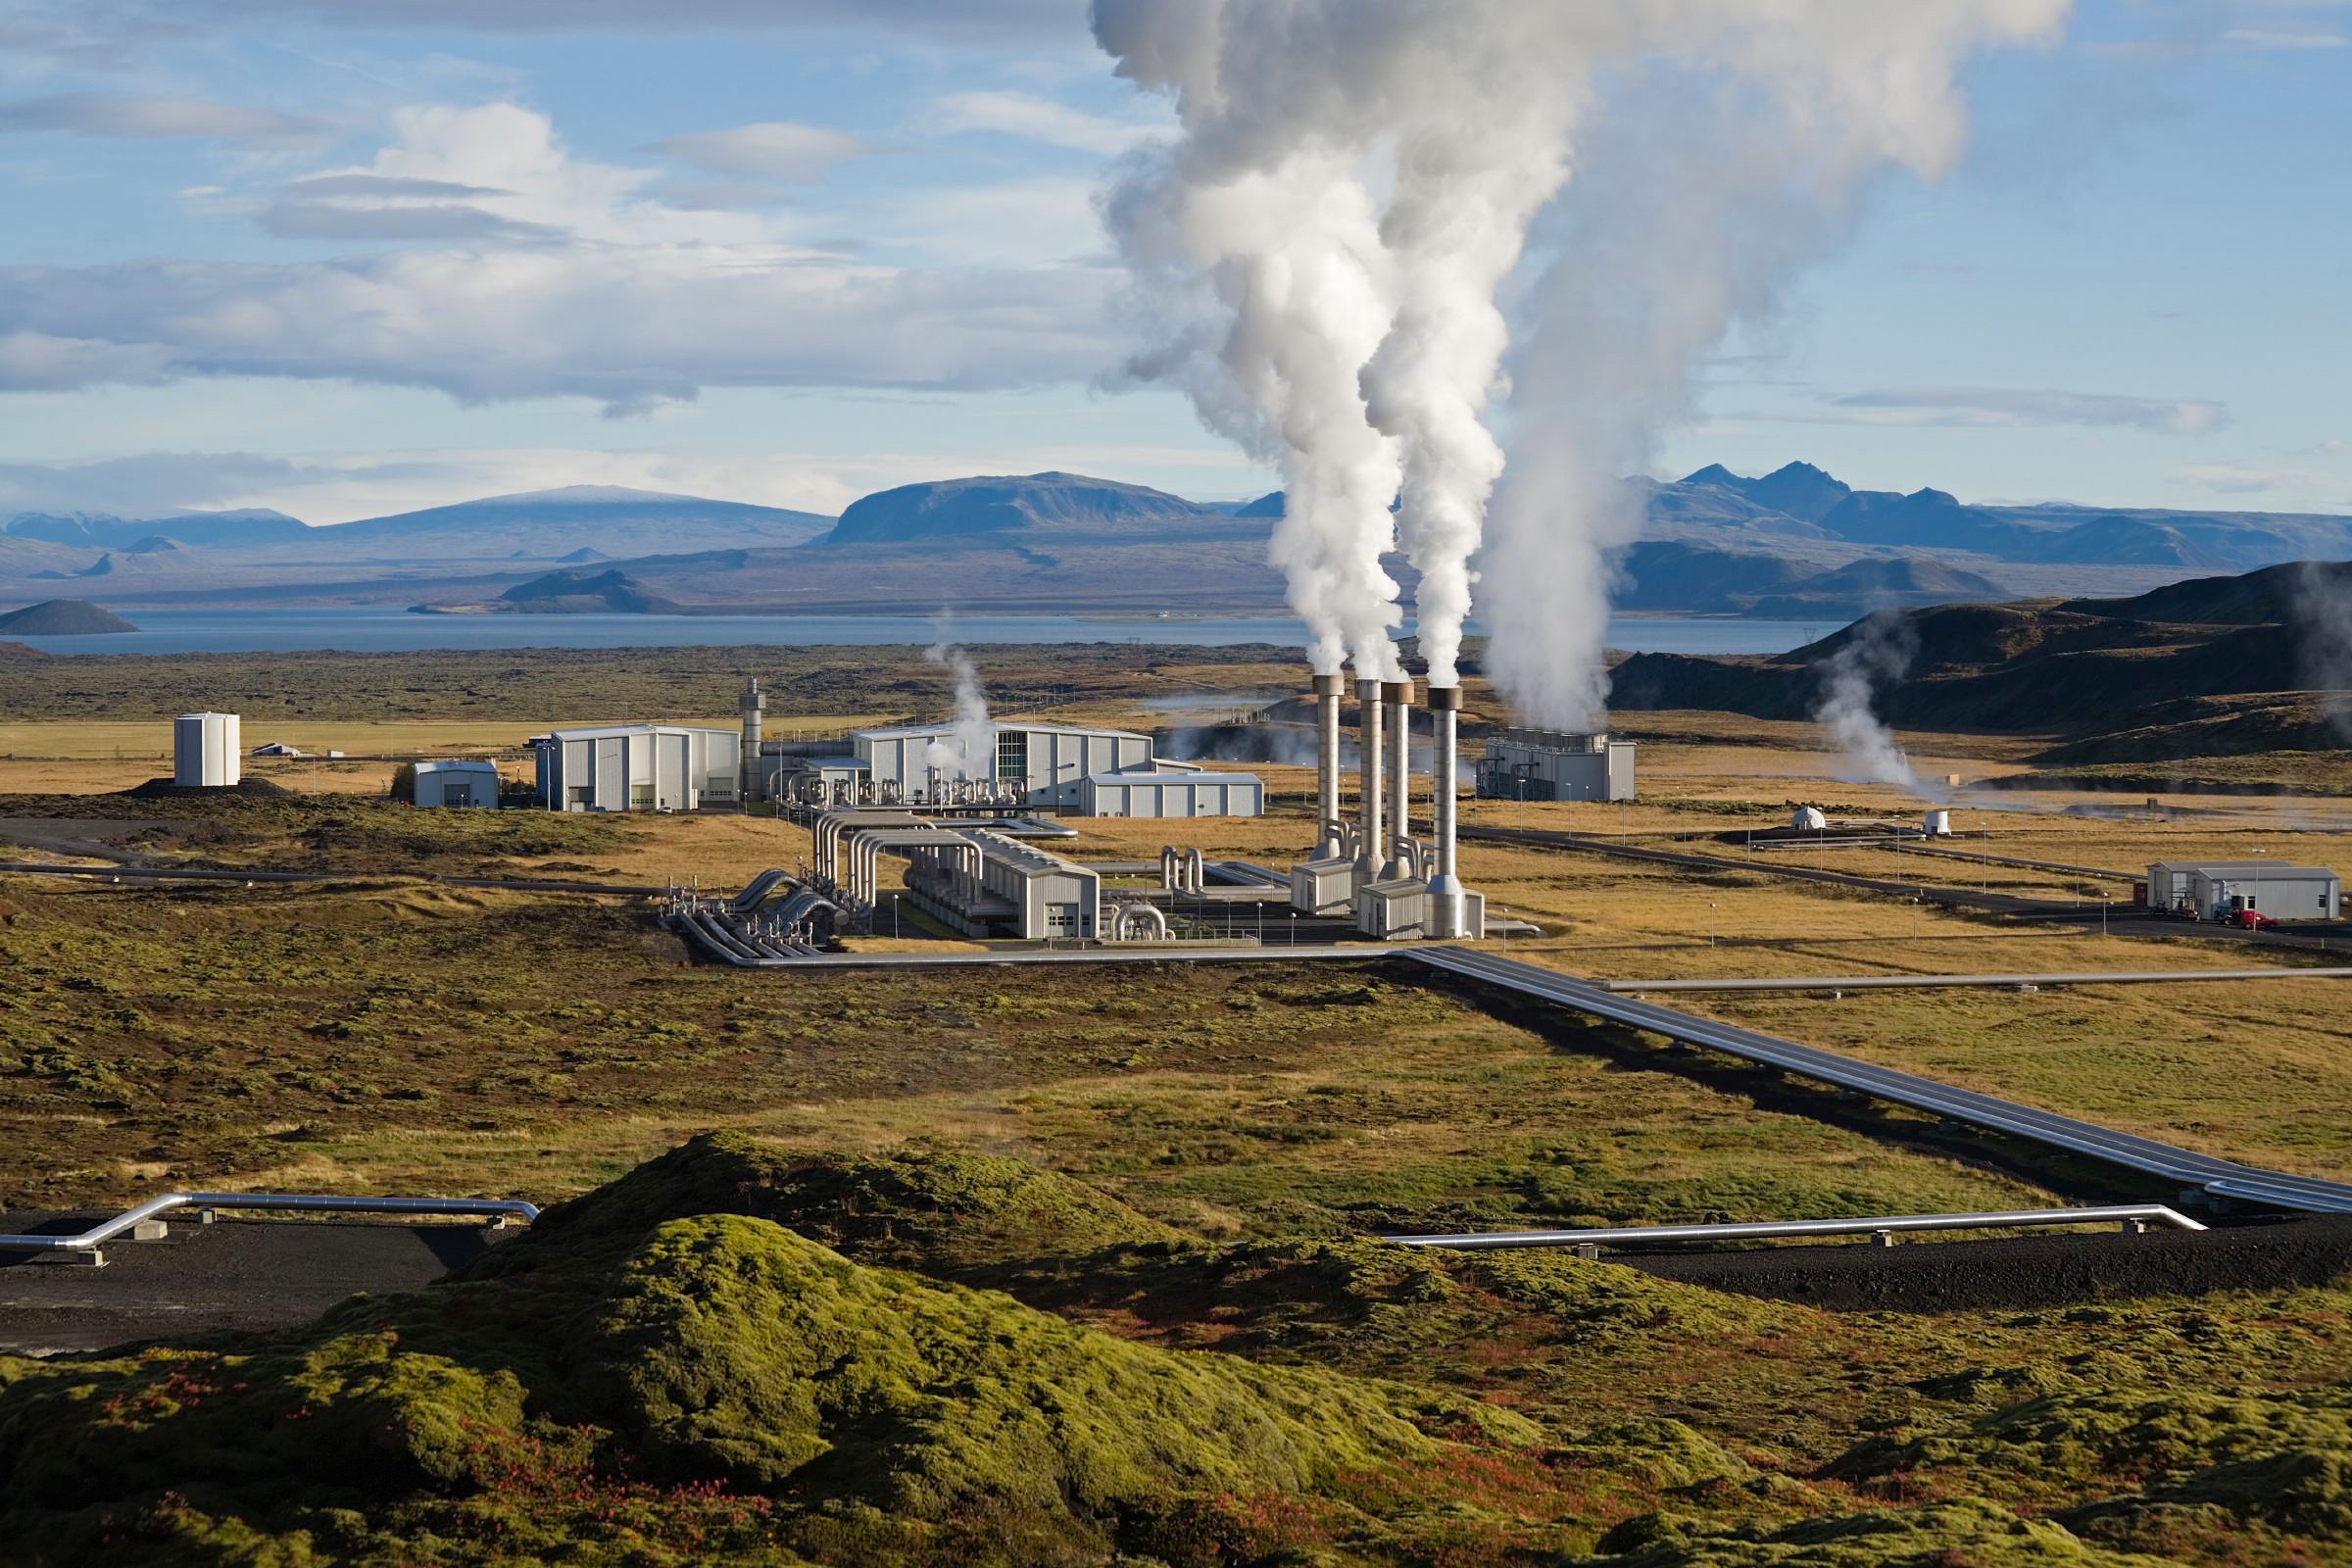 Geothermal Power Market to Witness Steady Growth at 6.2% CAGR| Mitsubishi Hitachi Power Systems Inc, Enel Green Power, General Electric, Ormat Technologies Inc.